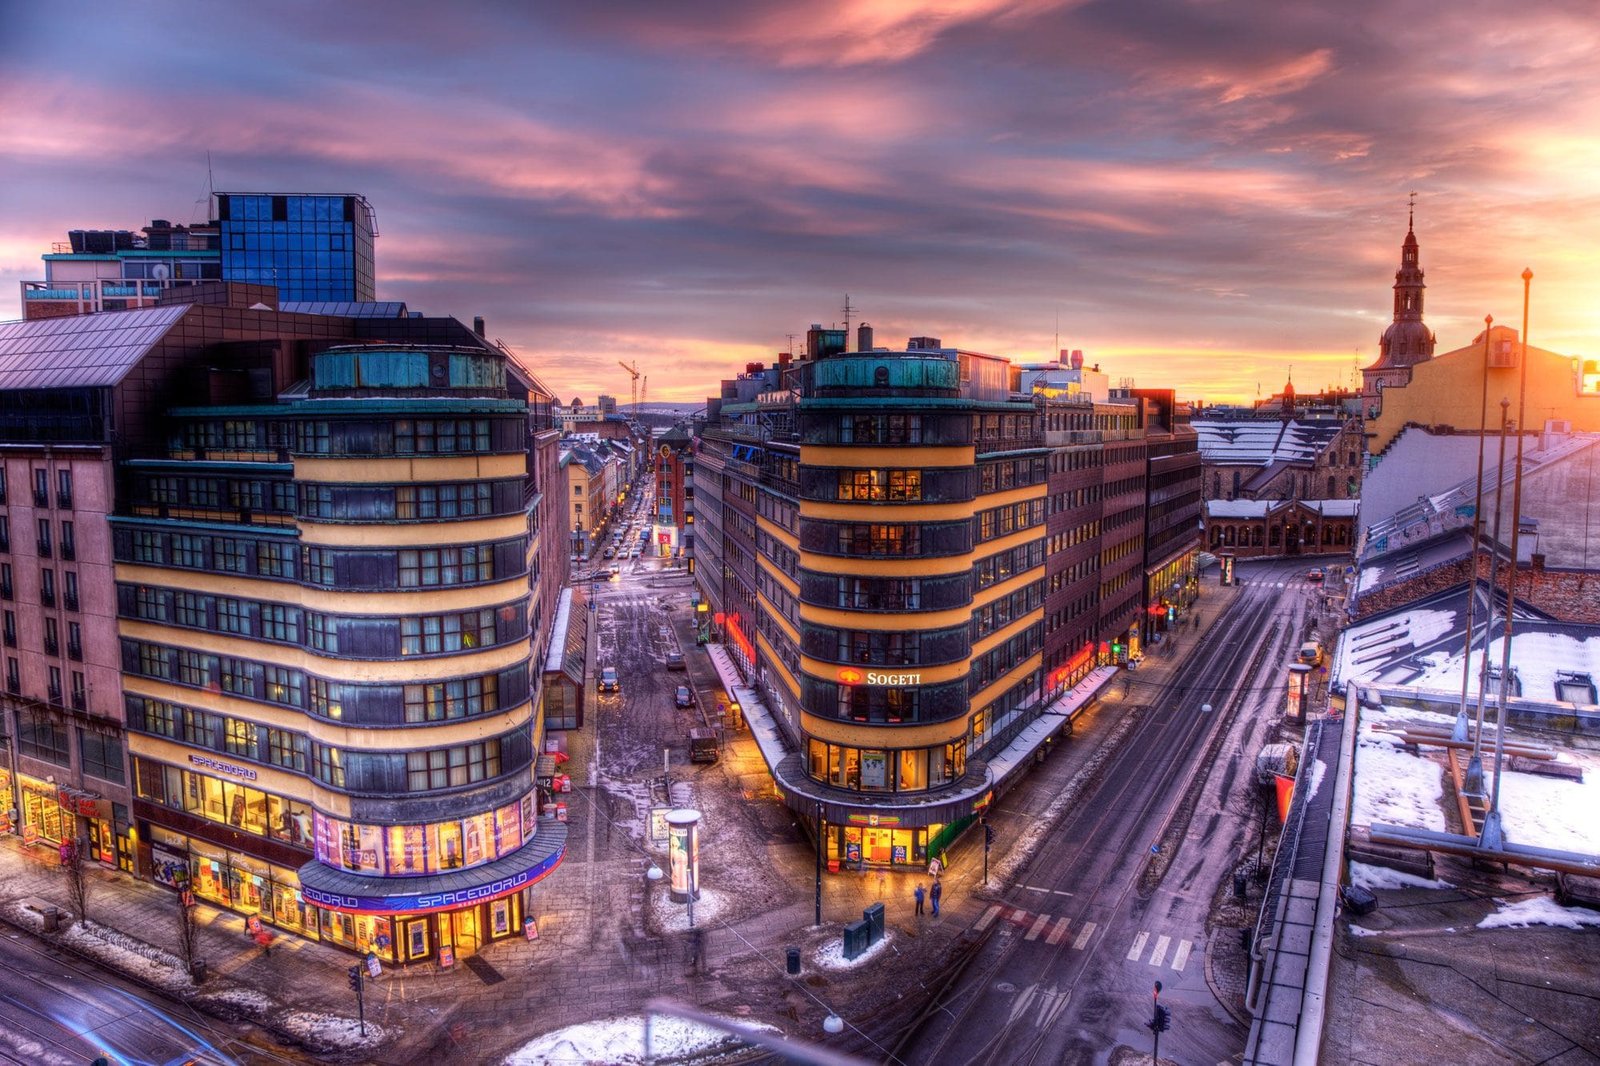 Oslo: The Heart of Norway